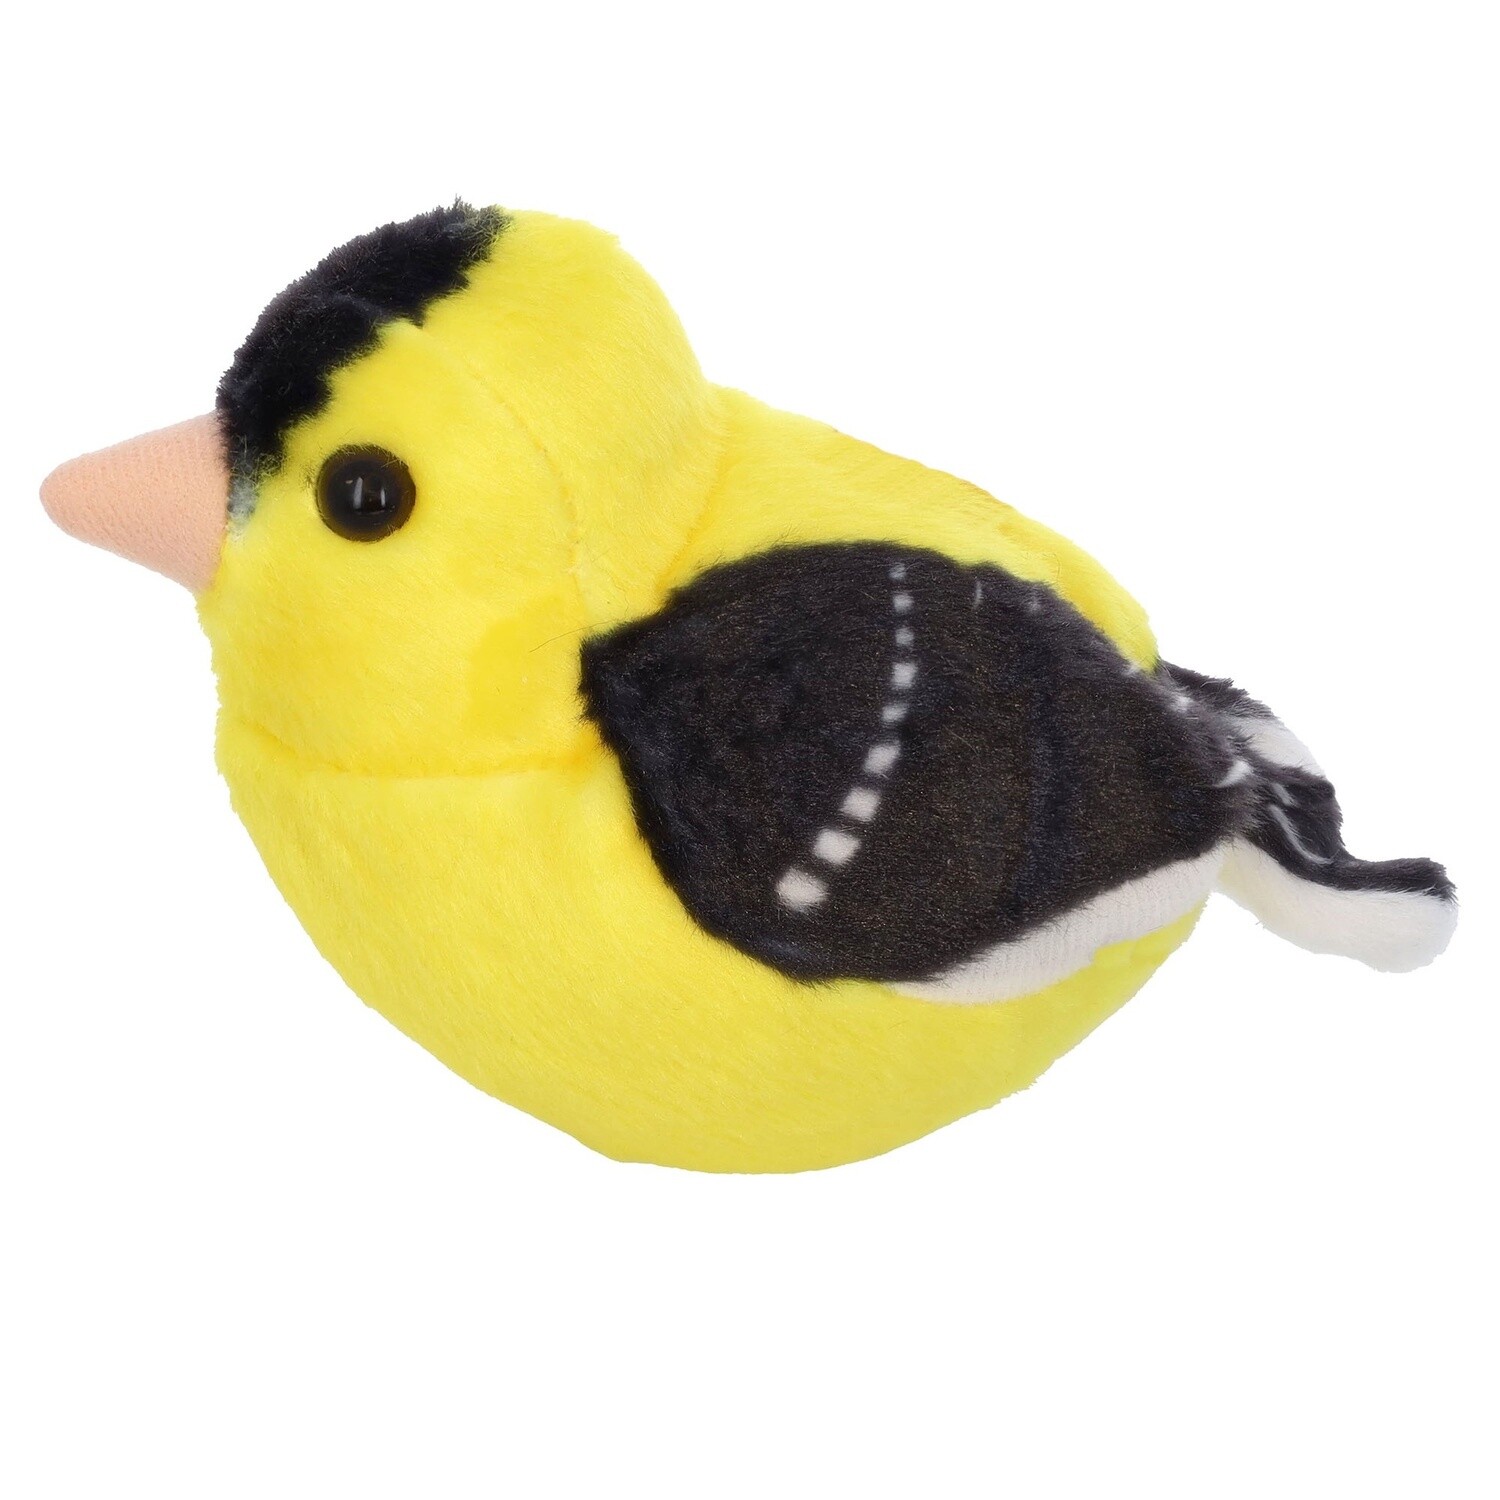 American Goldfinch Plush Animal with Sound